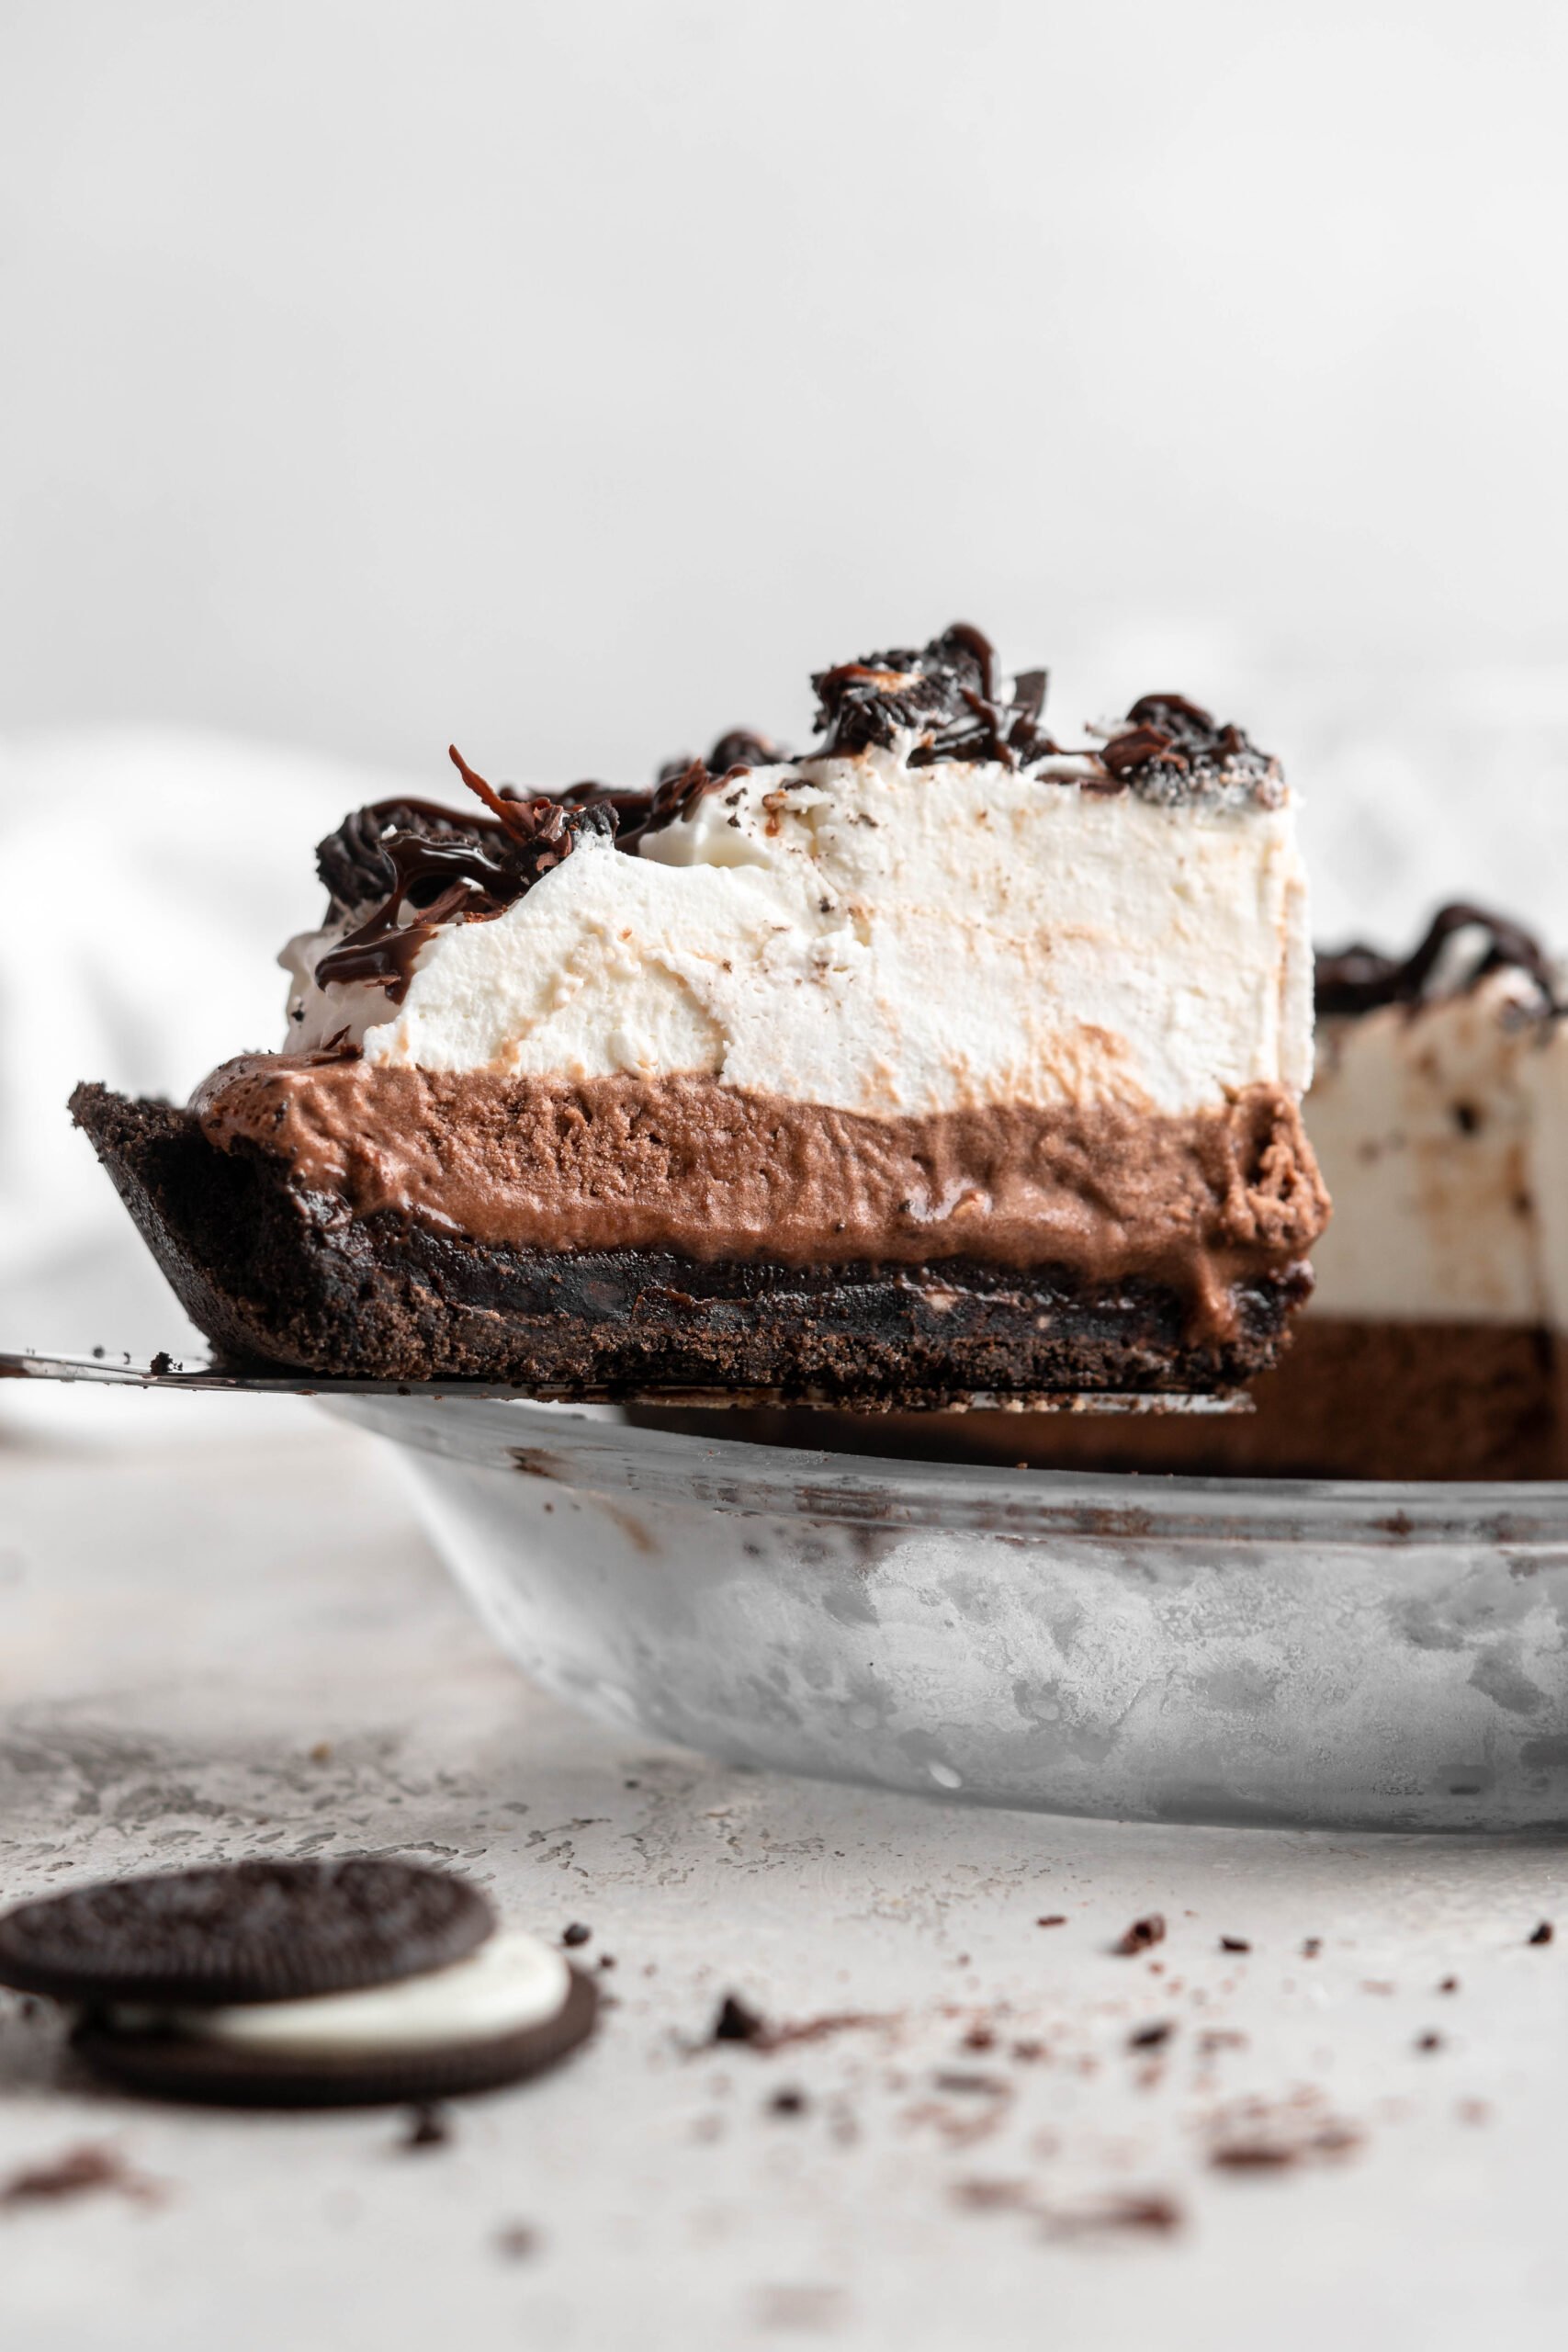 How To Make Old-Fashioned Texas Mud Pie